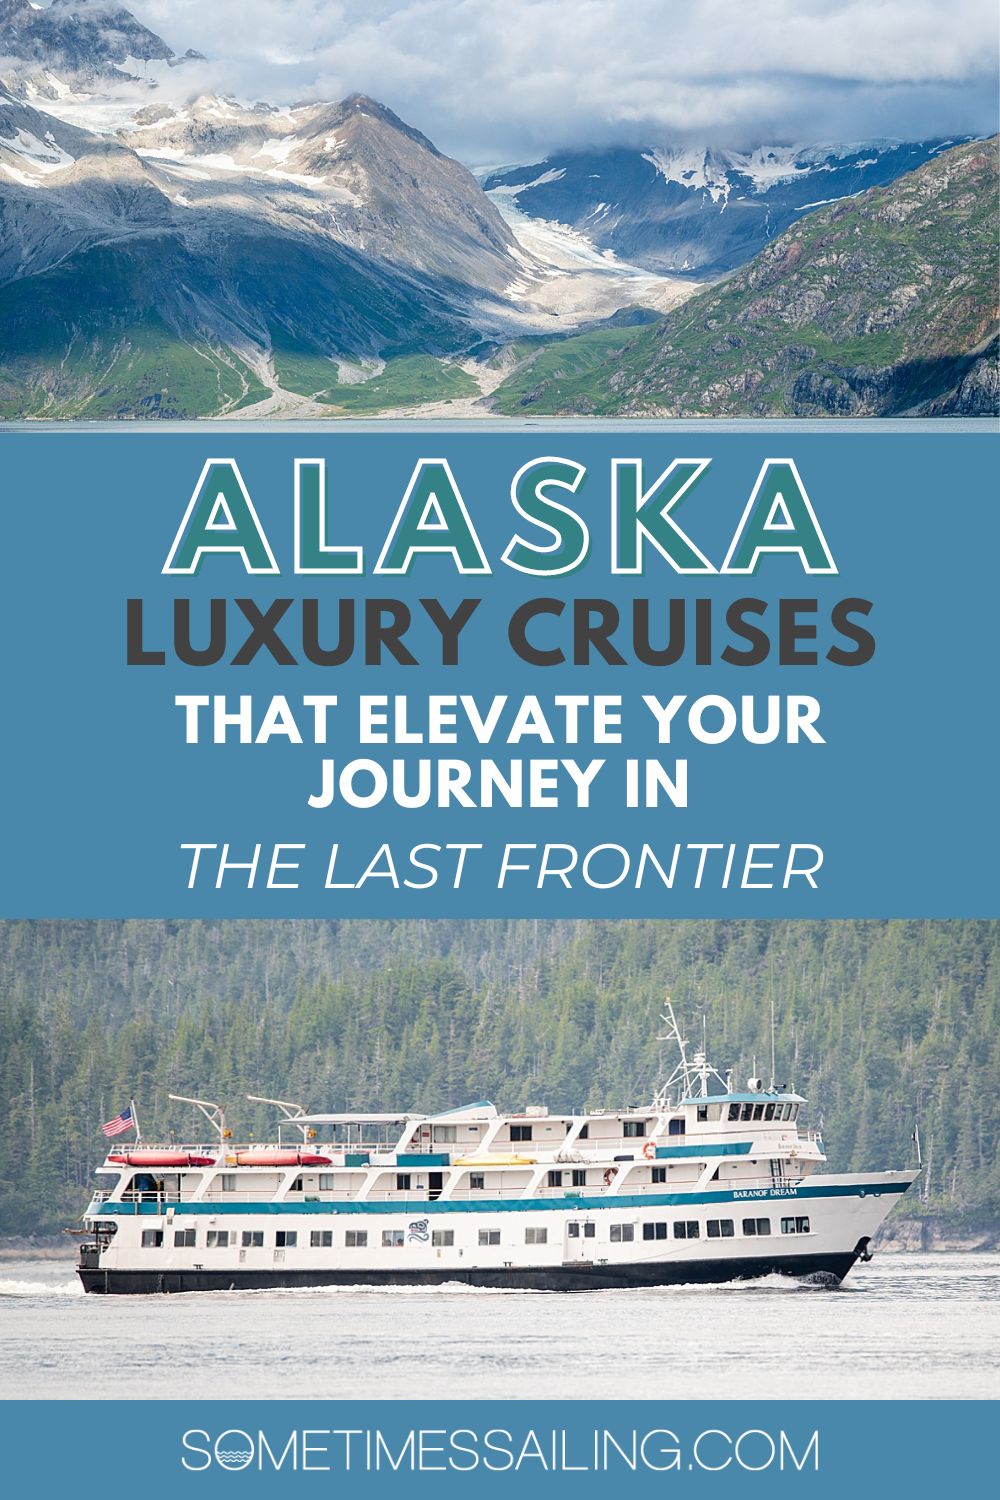 Alaska Luxury Cruises that elevate your journey in The Last Frontier with a top photo of scenery in Alaska and bottom photo of a small cruise ship in Alaska.